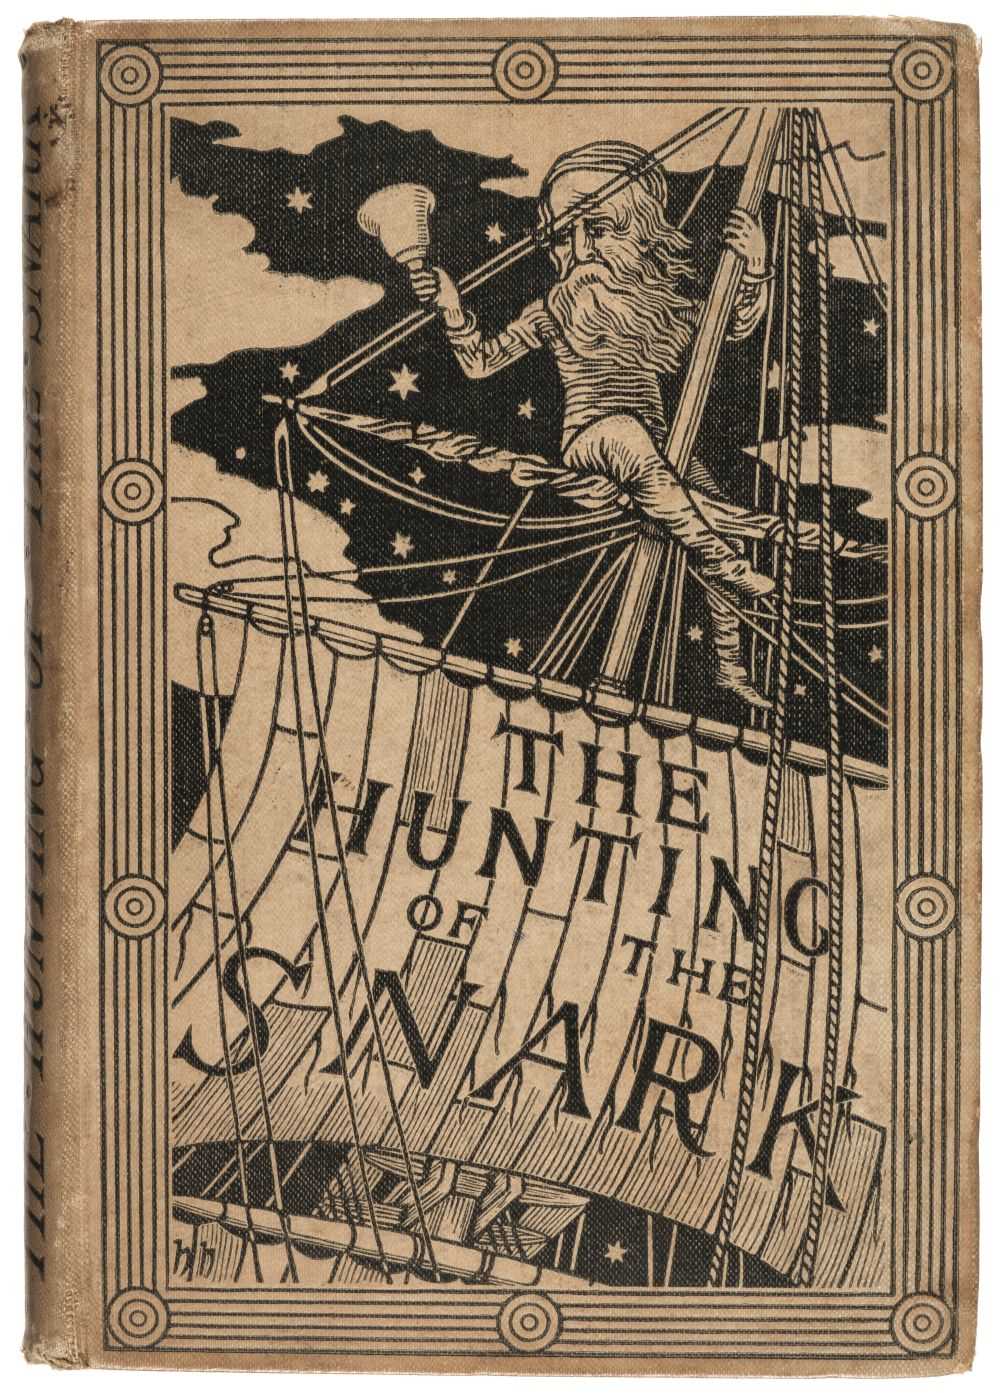 Lot 442 - Dodgson (Charles Luttwidge, 'Lewis Carroll') The Hunting of the Snark, 1876